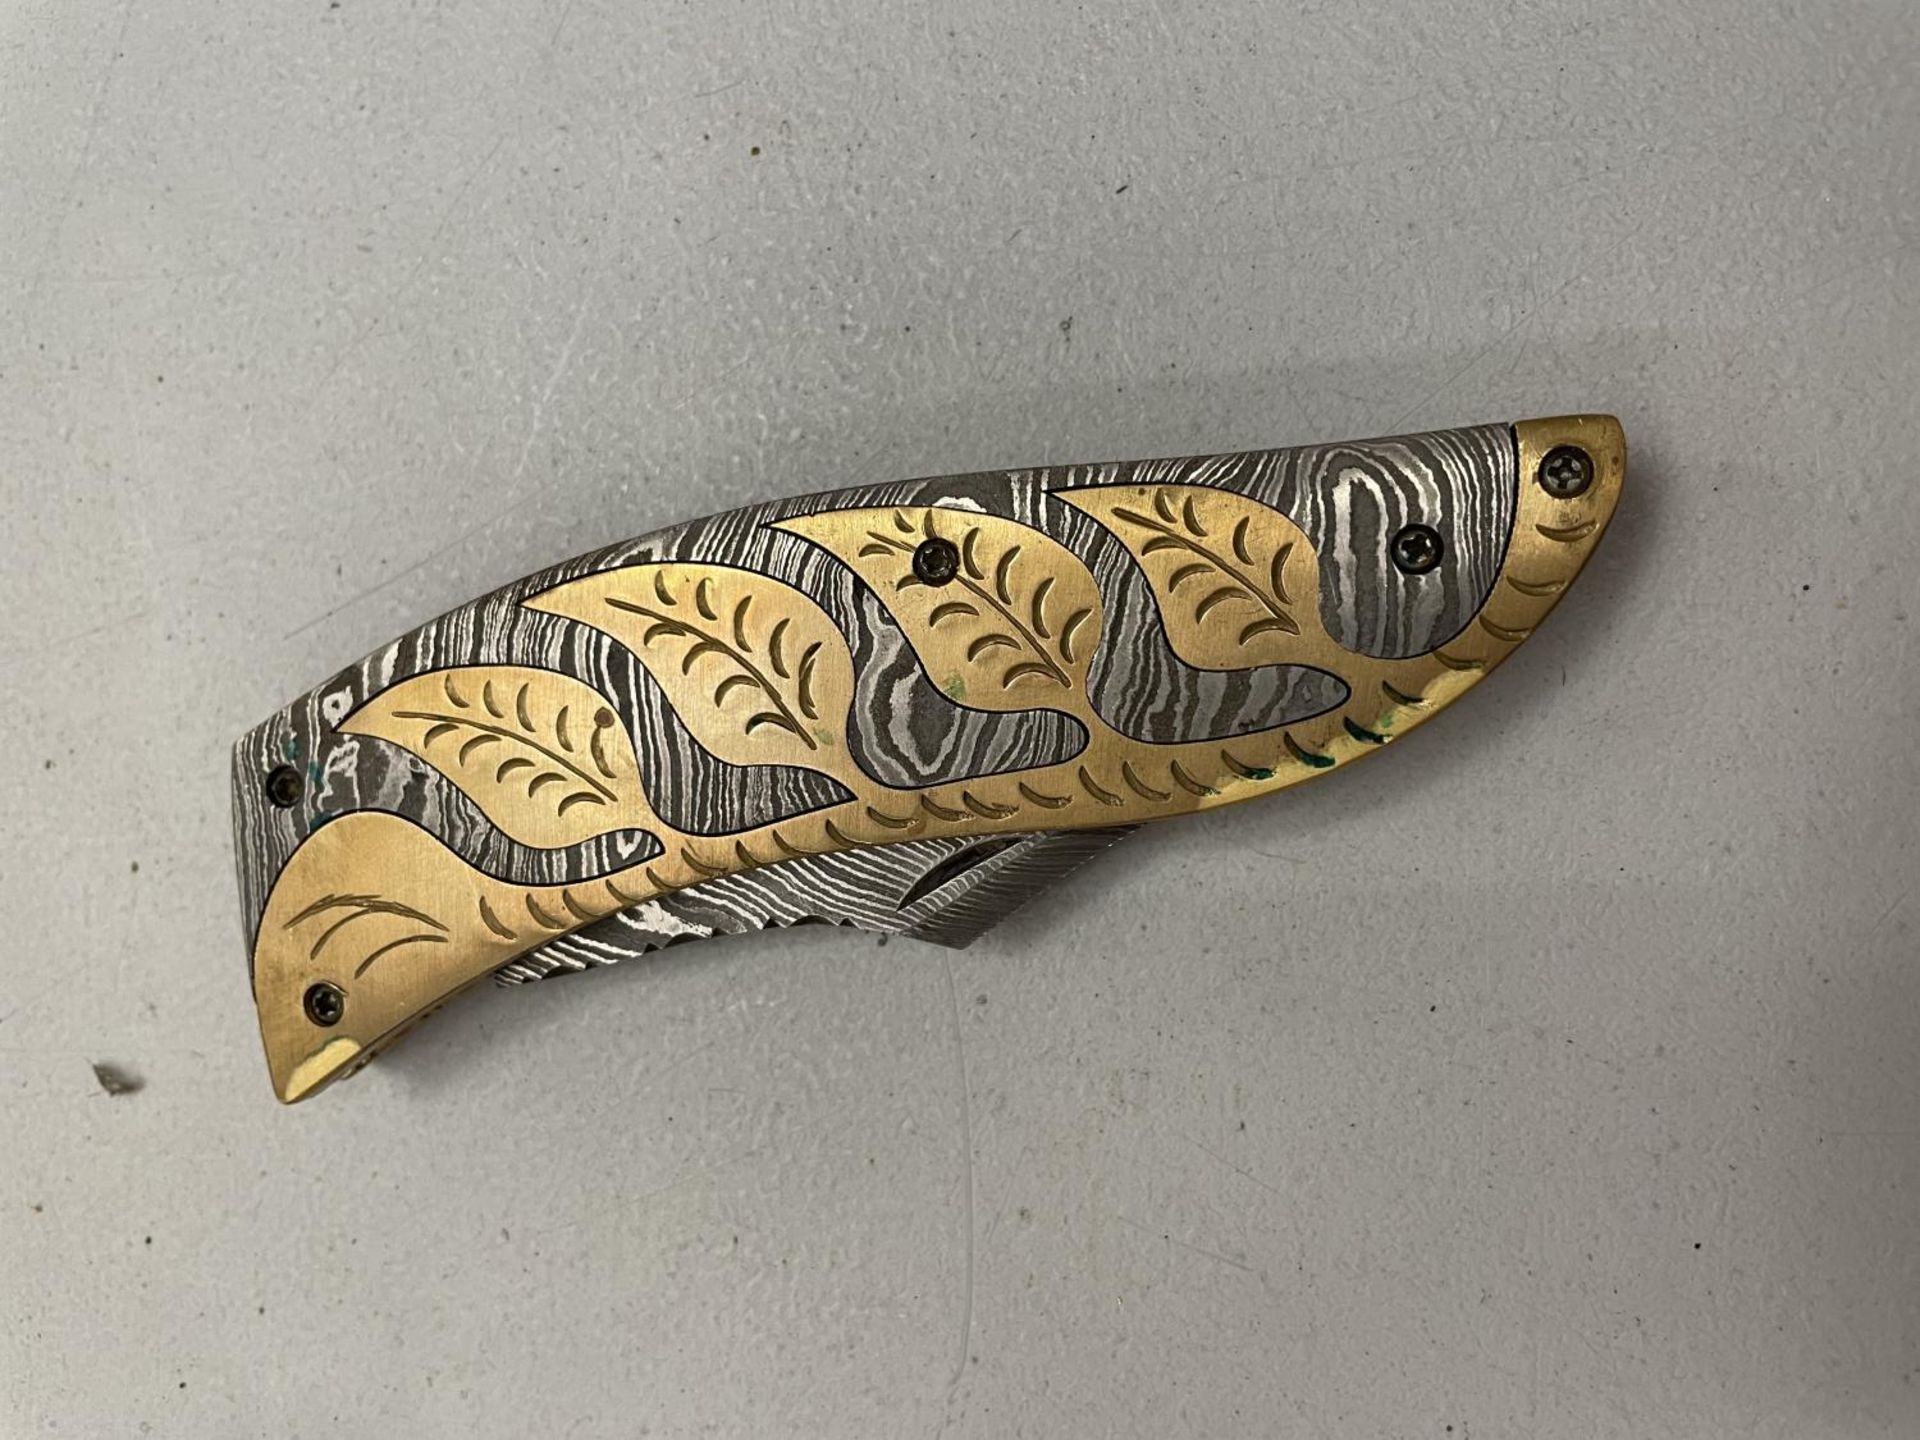 AN ORNATE 'PERKIN' SINGLE BLADED FOLDING POCKET KNIFE WITH DAMASCUS BLADE - Image 3 of 3